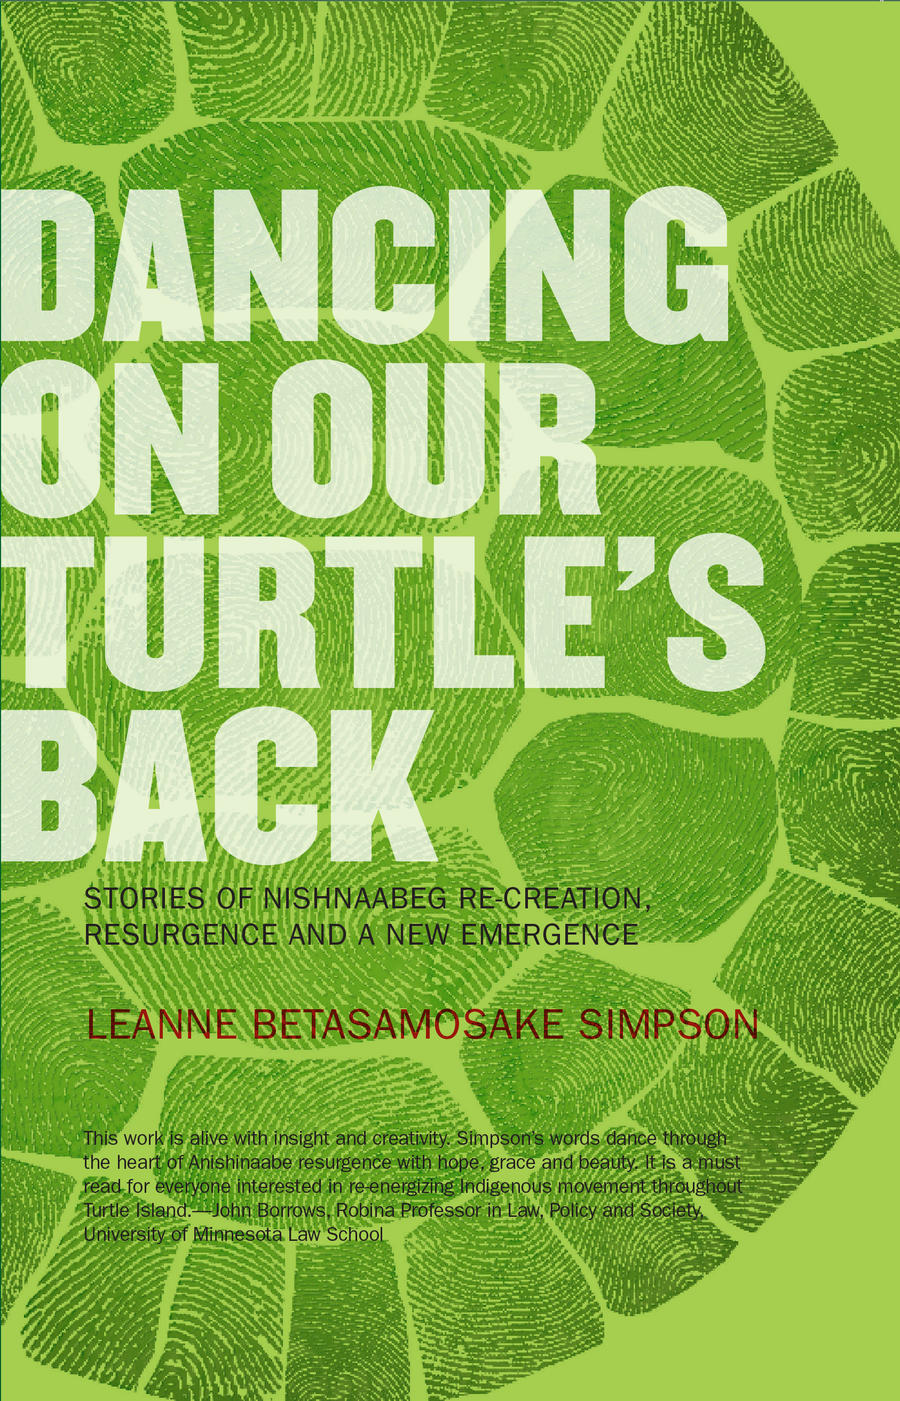 Image Dancing on our turtle's back : stories of Nishnaabeg re-creation, resurgence and a new emergence